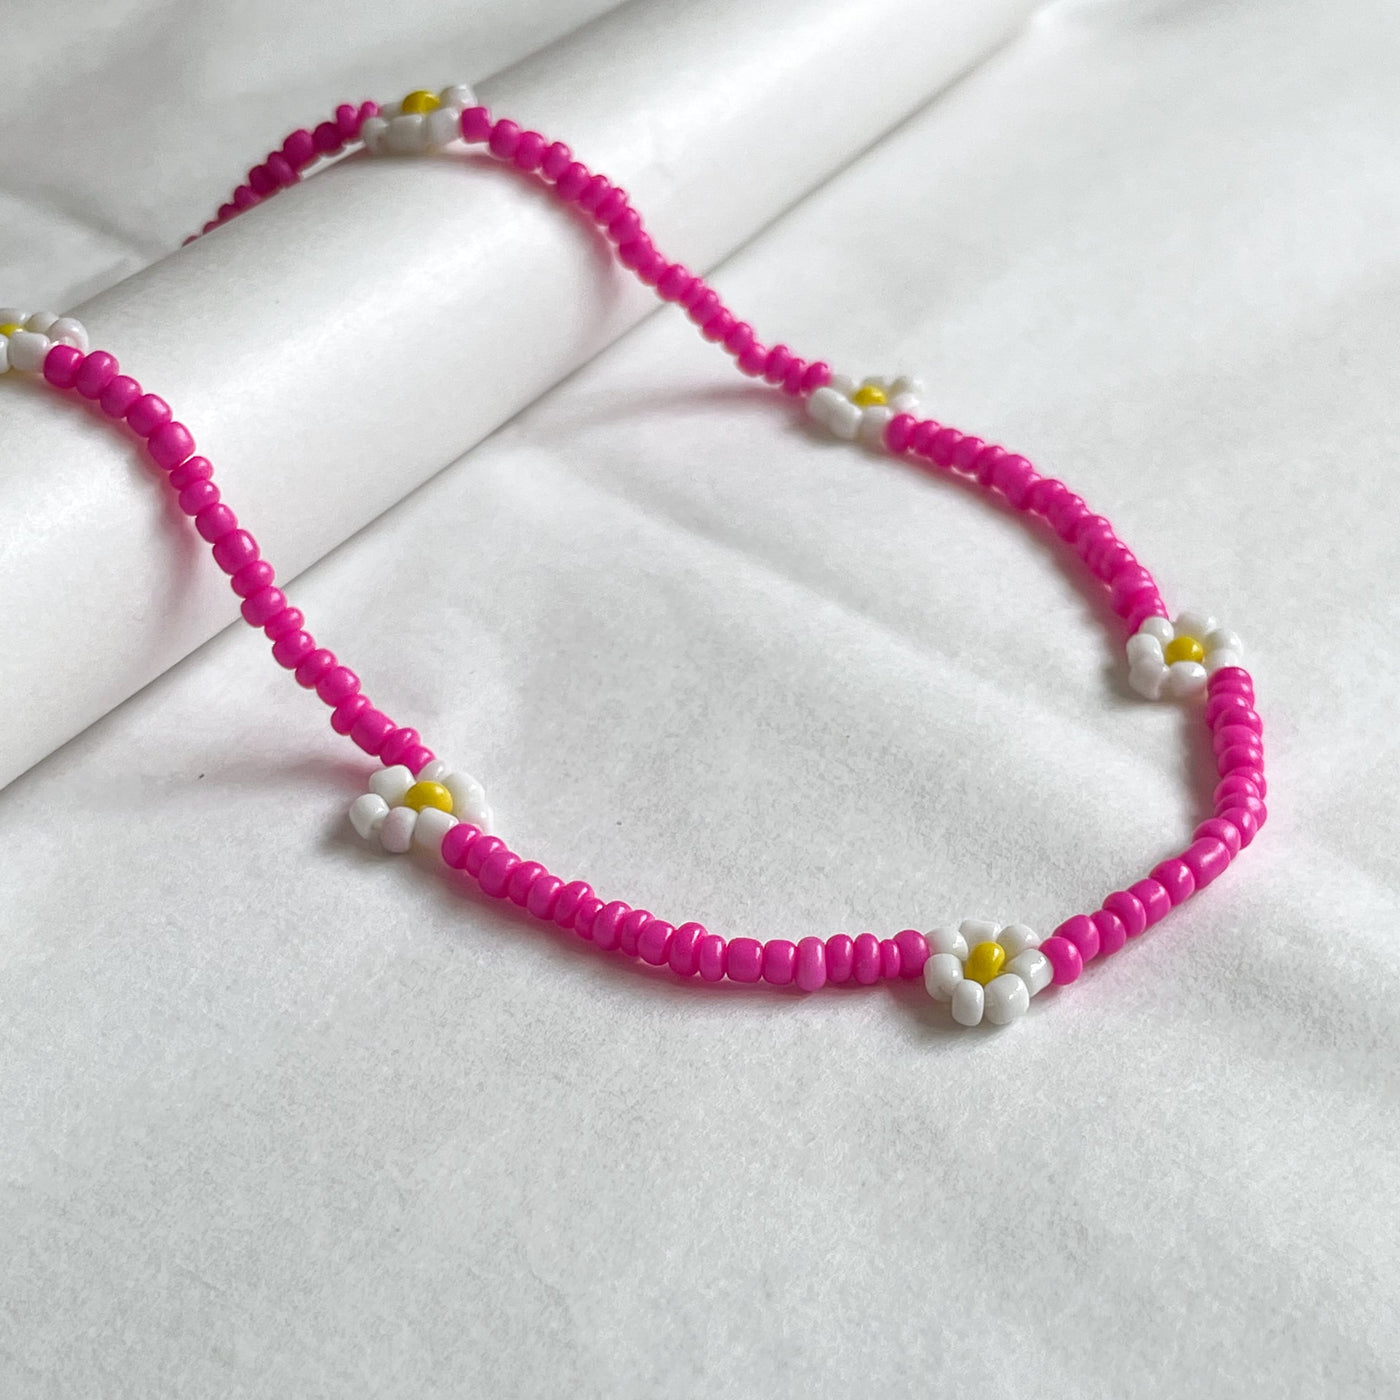 Pink Daisy Bead Necklace